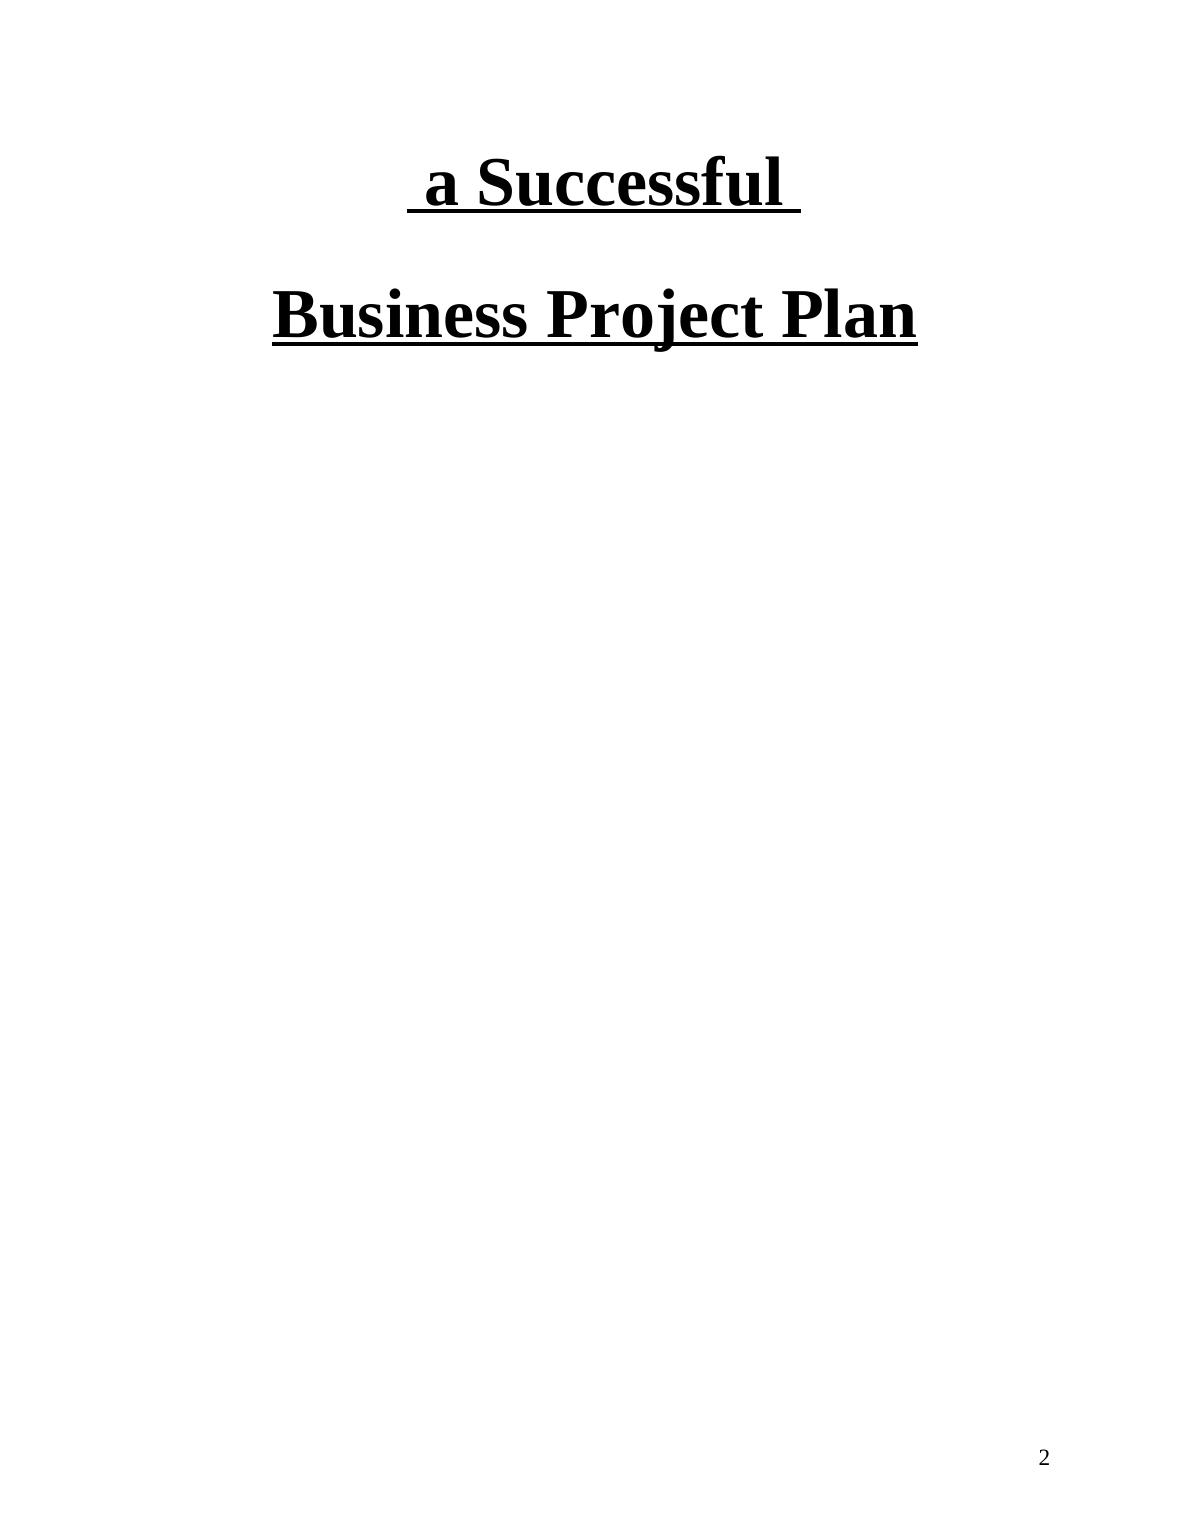 Managing a  Successful Business Project -   Assignment_2